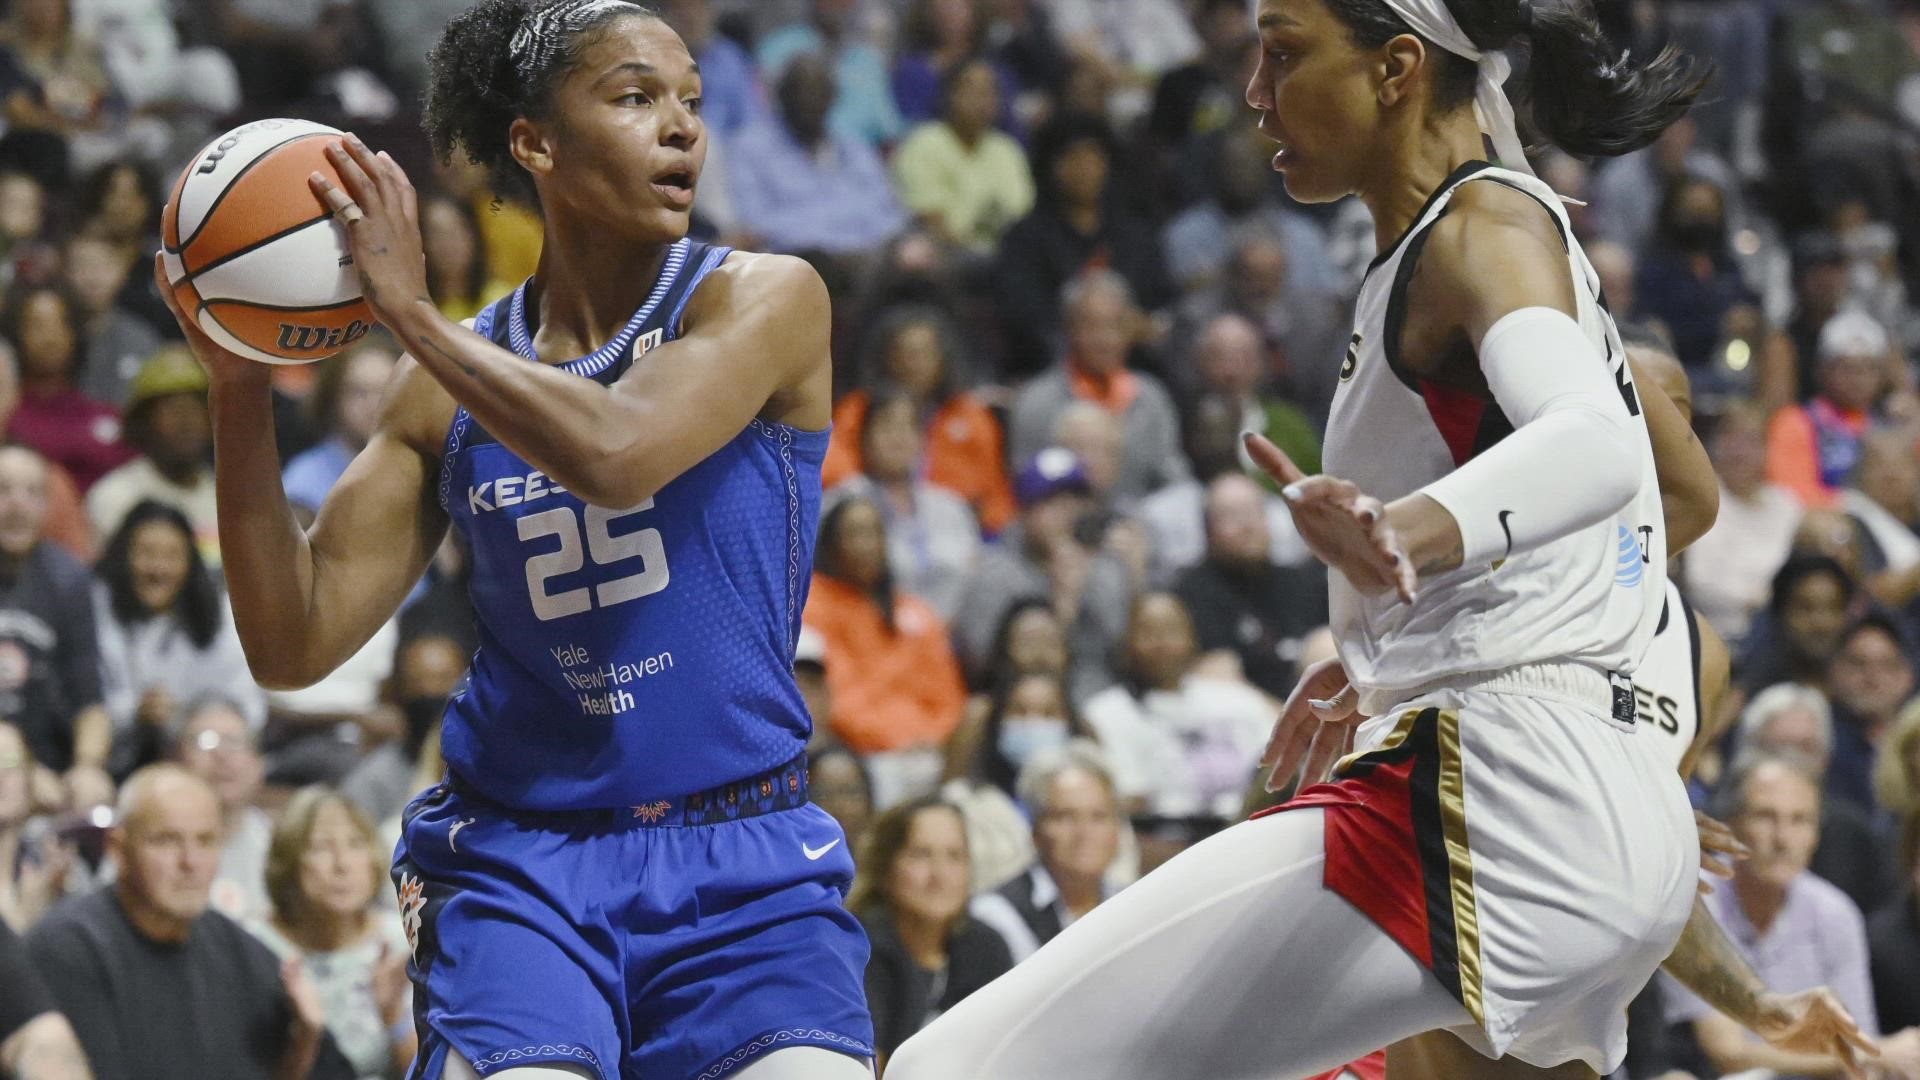 Alyssa Thomas, Brionna Jones to play for Team USA in World Cup